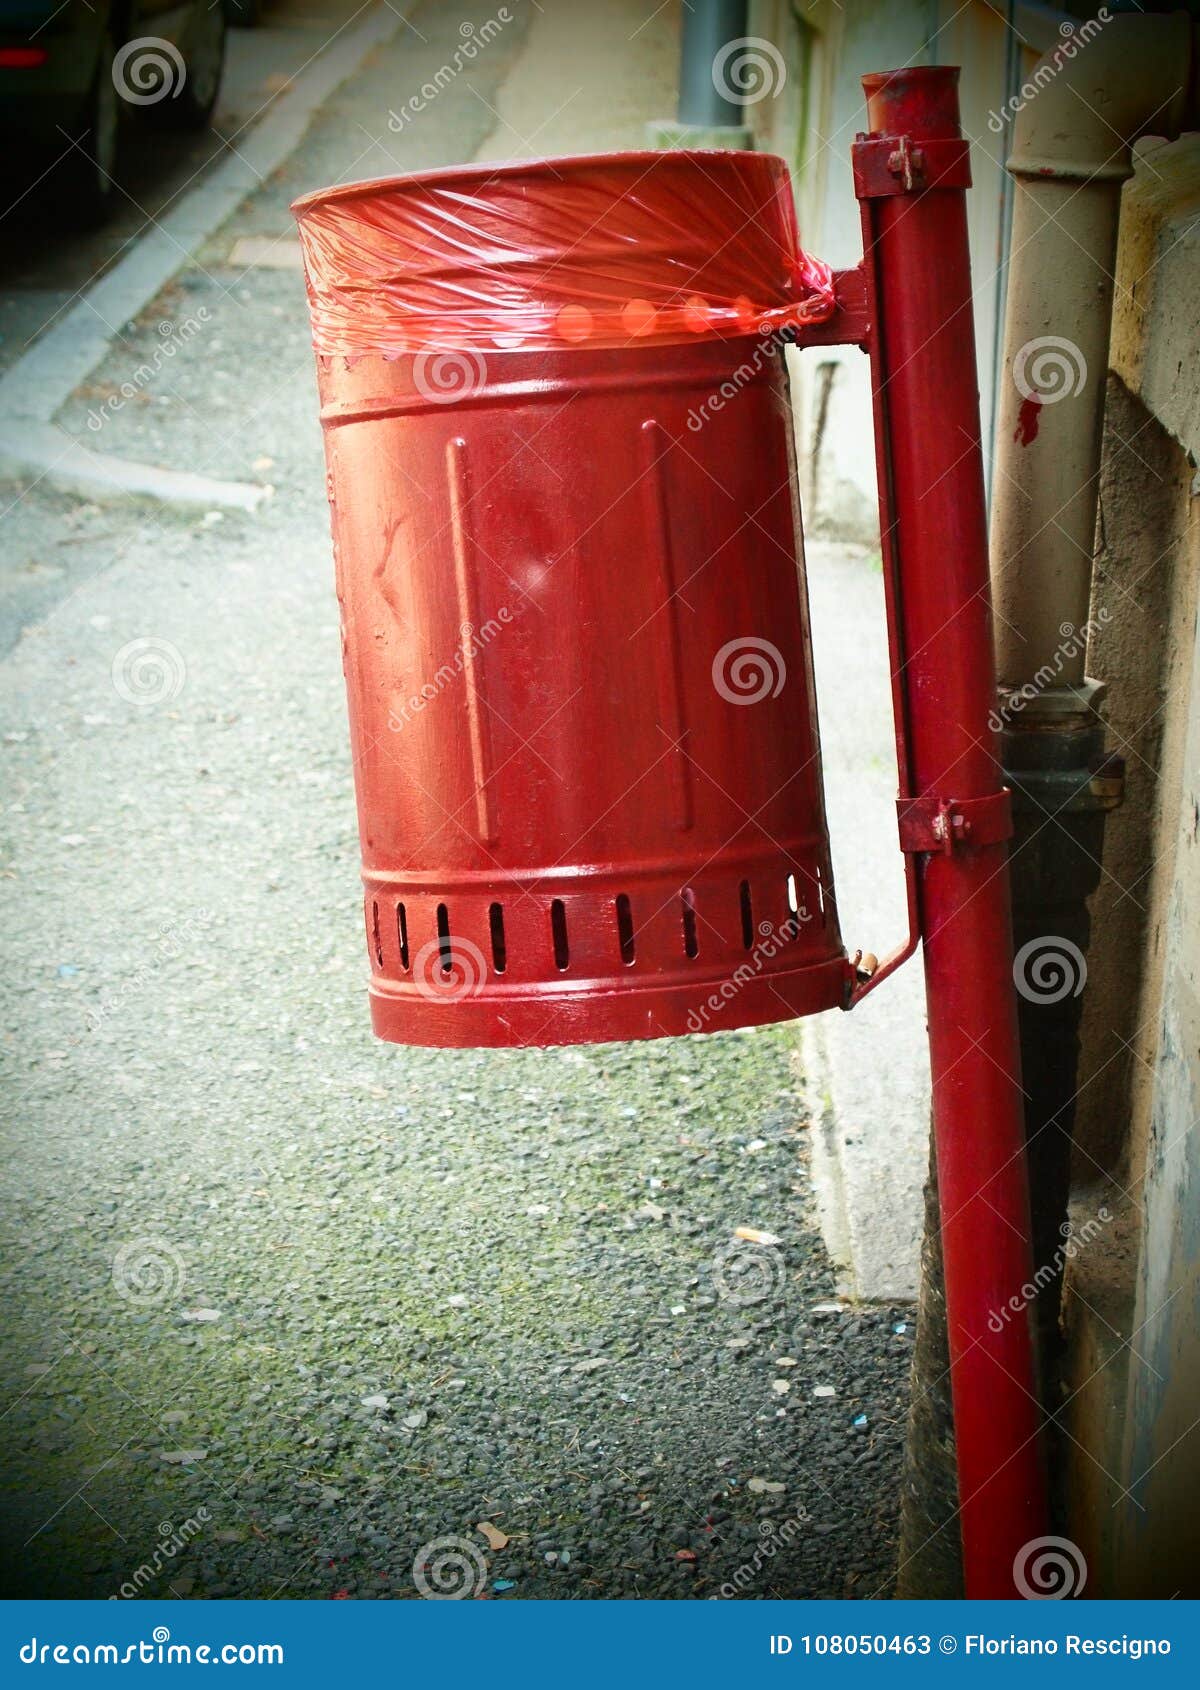 Huge Garbage Can In The Street Of The City Stock Photo, Picture and Royalty  Free Image. Image 115439972.